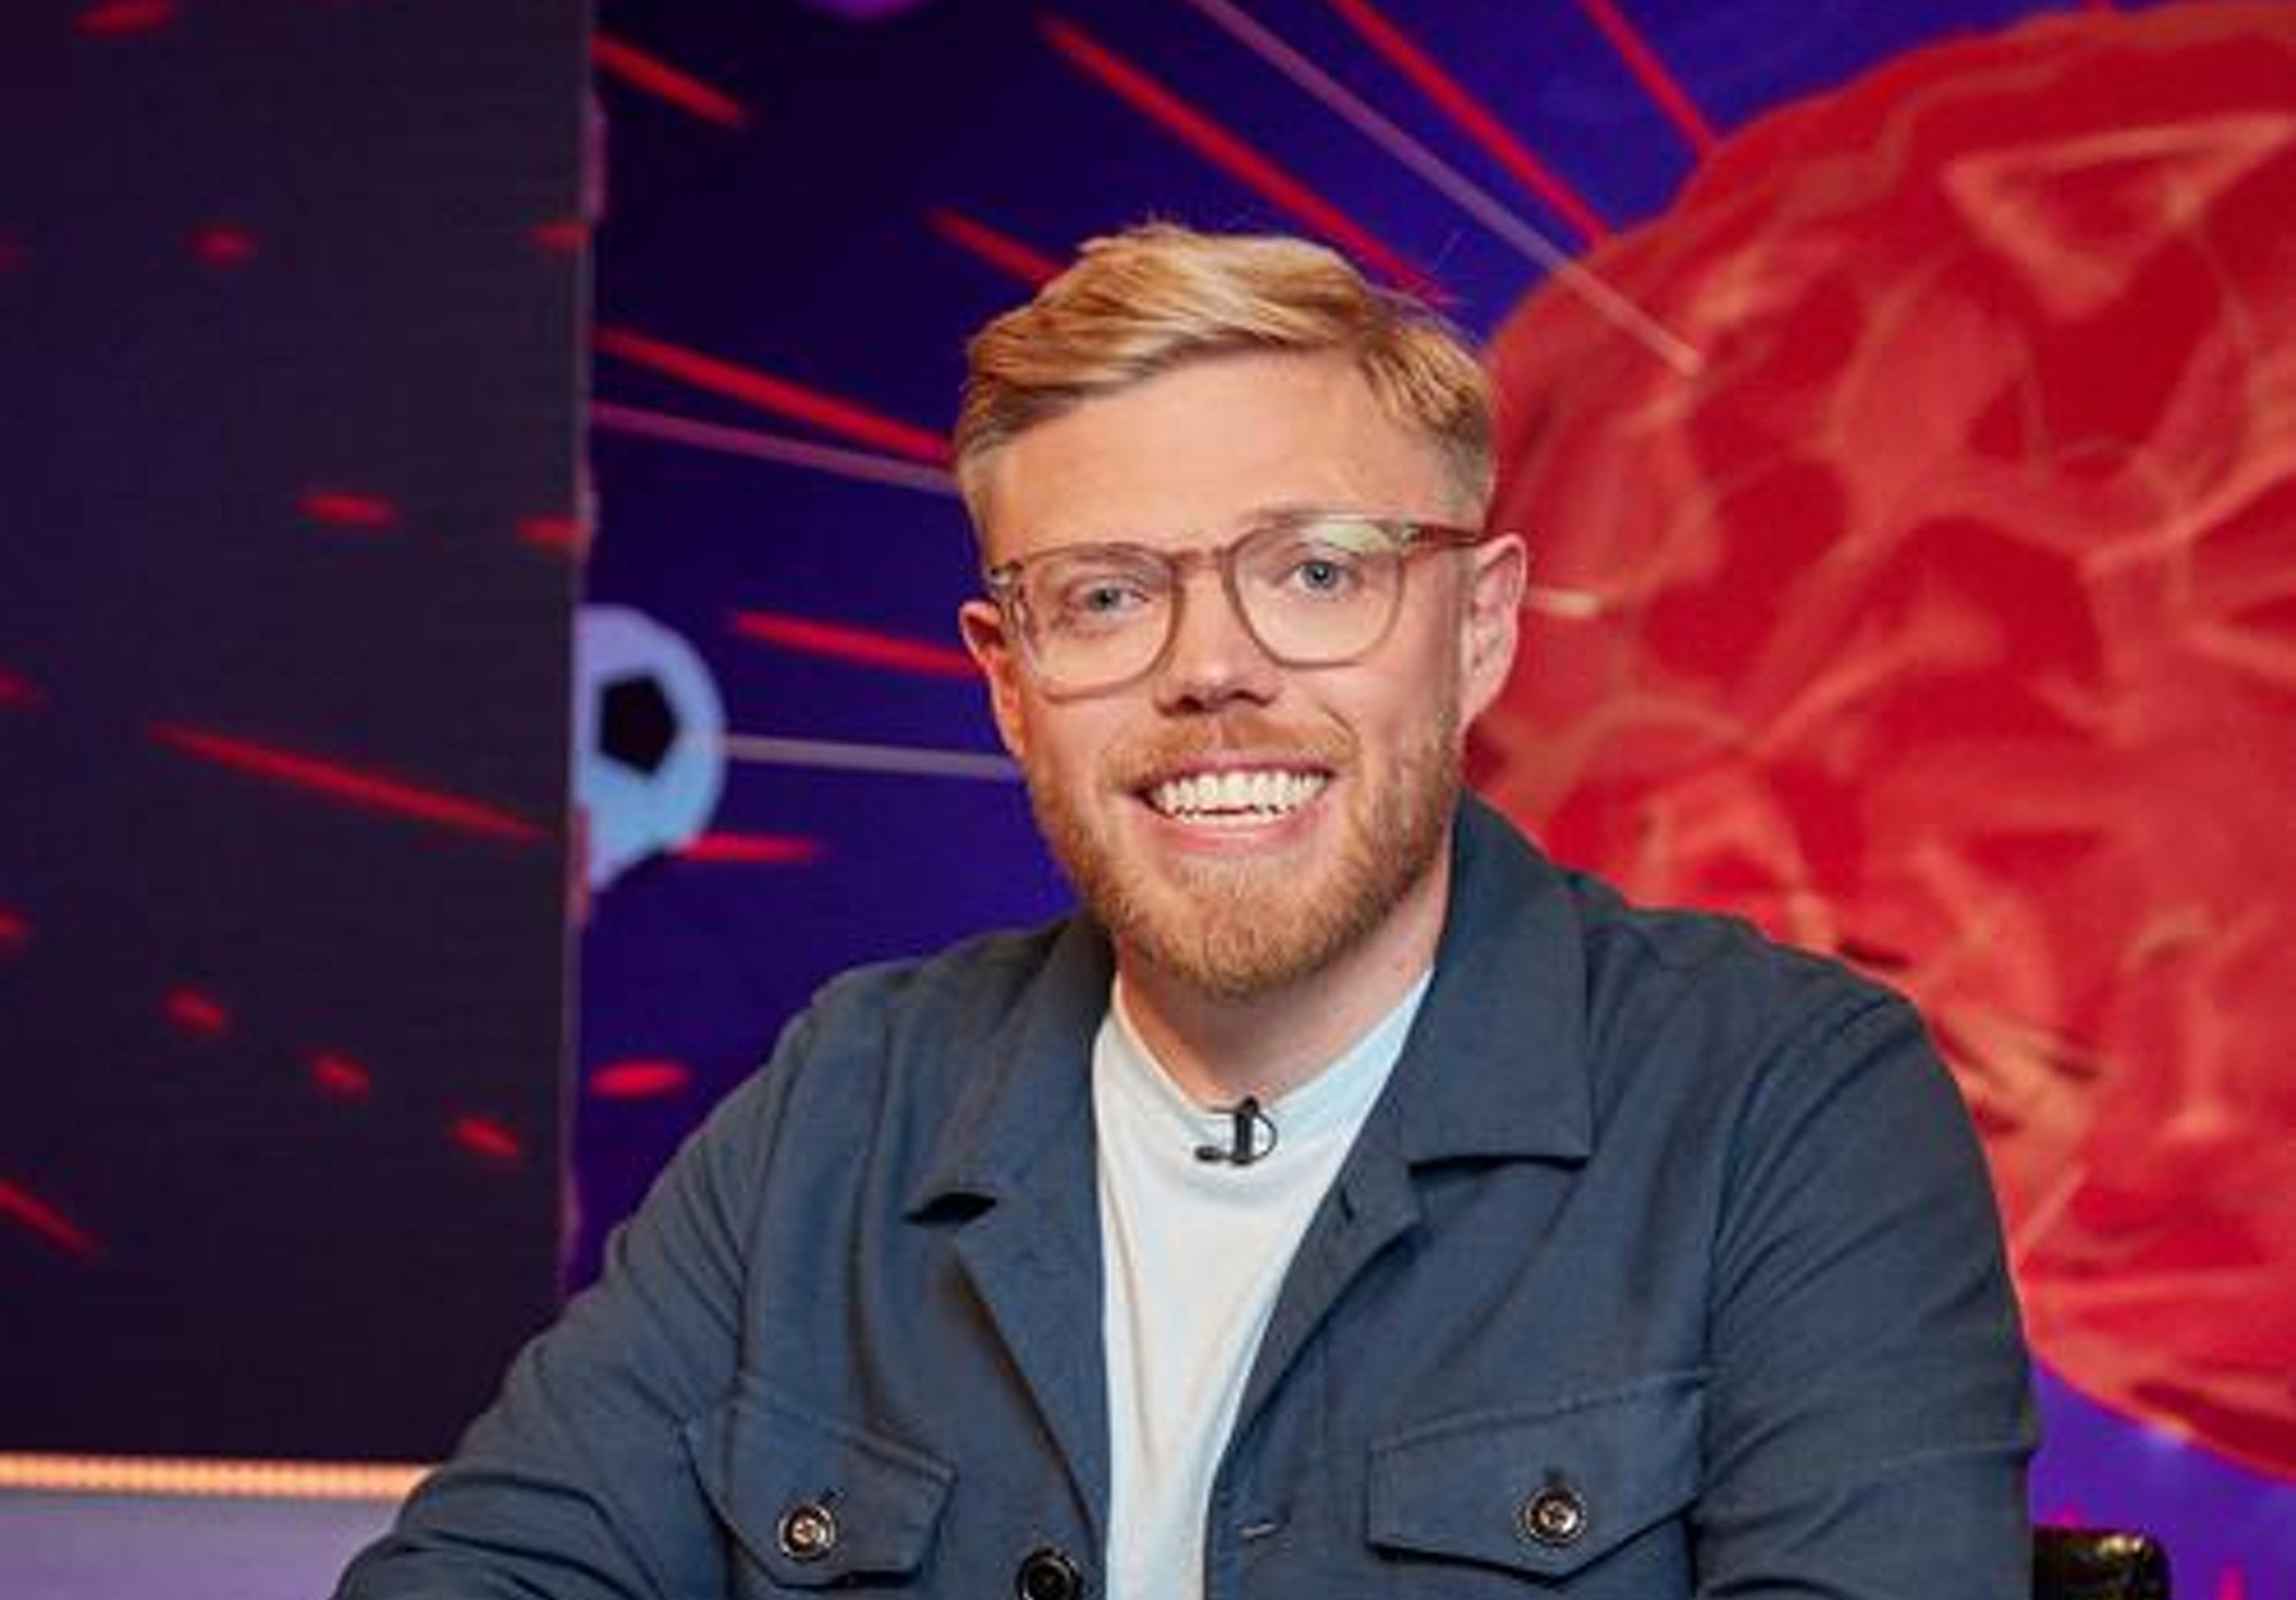 Rob Beckett on being himself, lockdown life and his funny new TV show